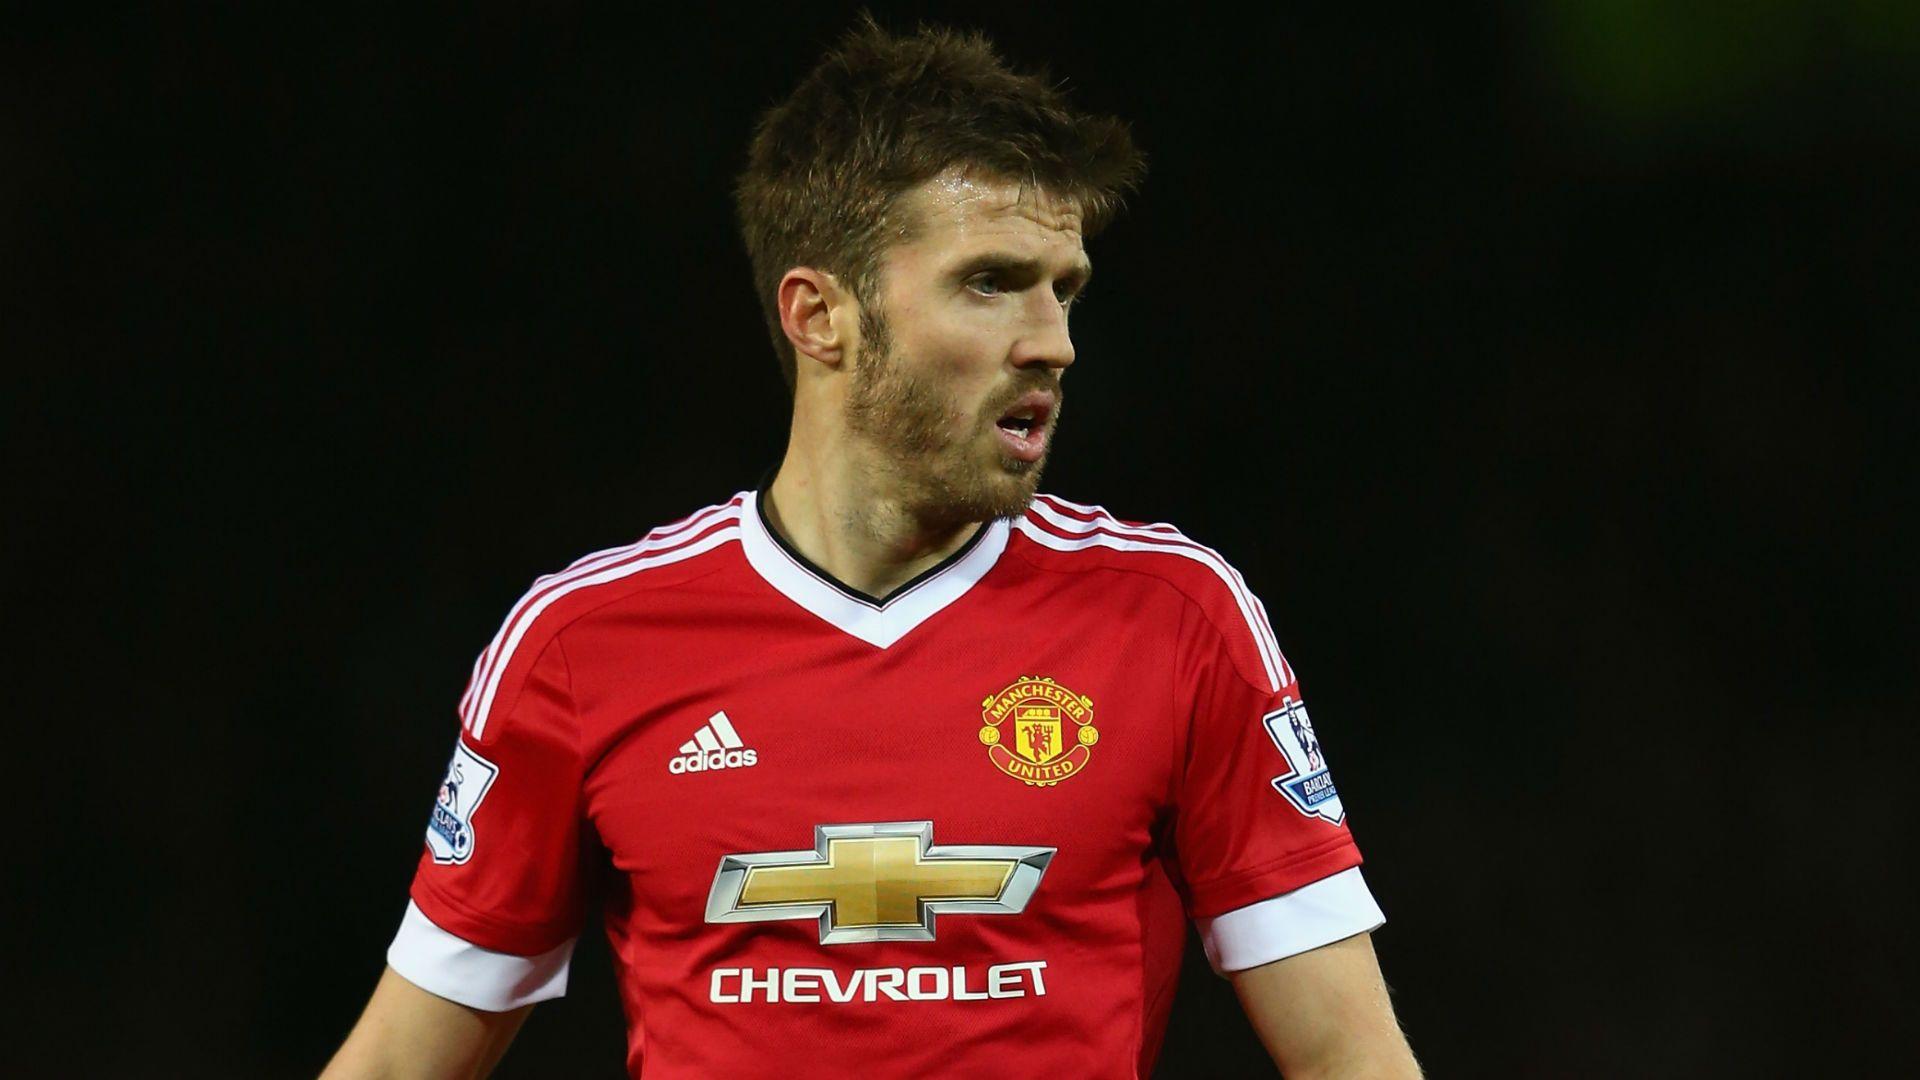 Carrick set to return for United, Darmian out